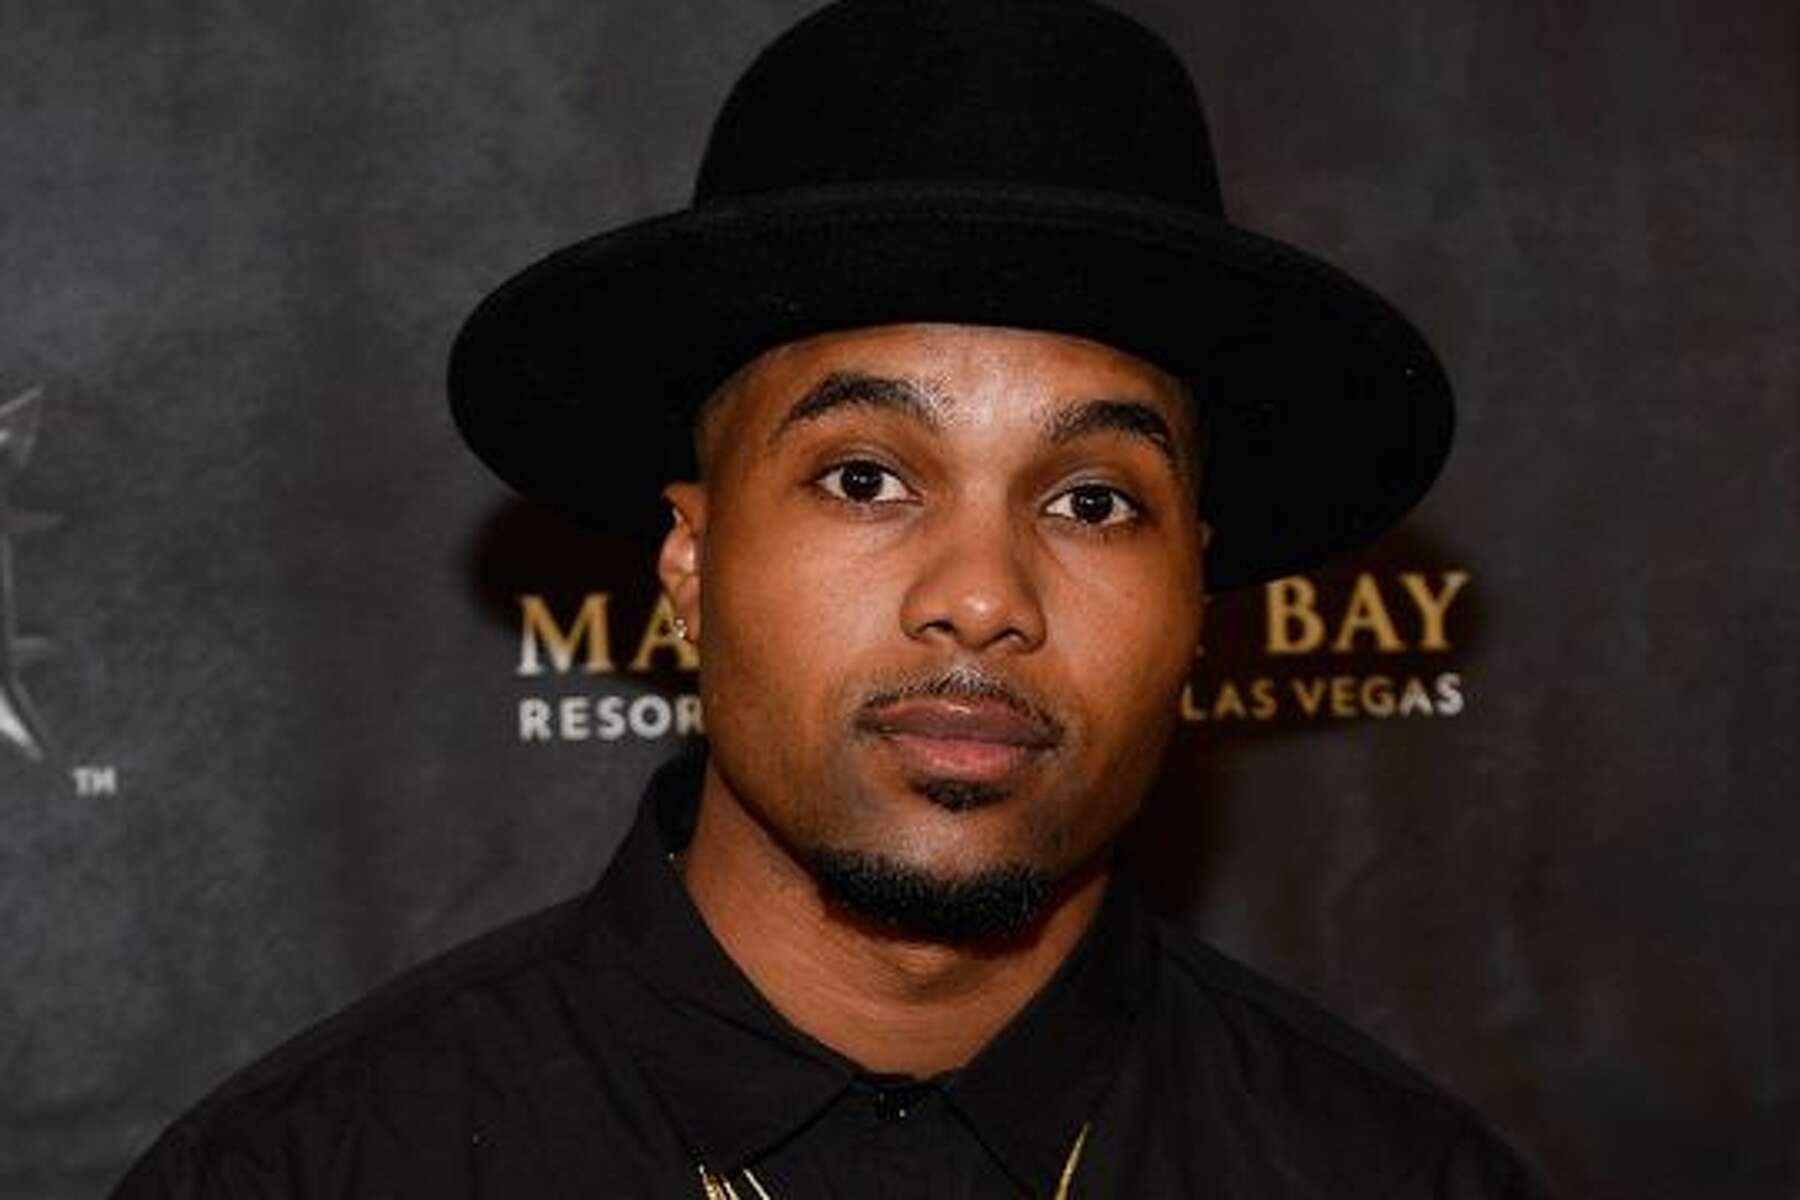 Steelo Brim's biography: wife, age, net worth, height, house